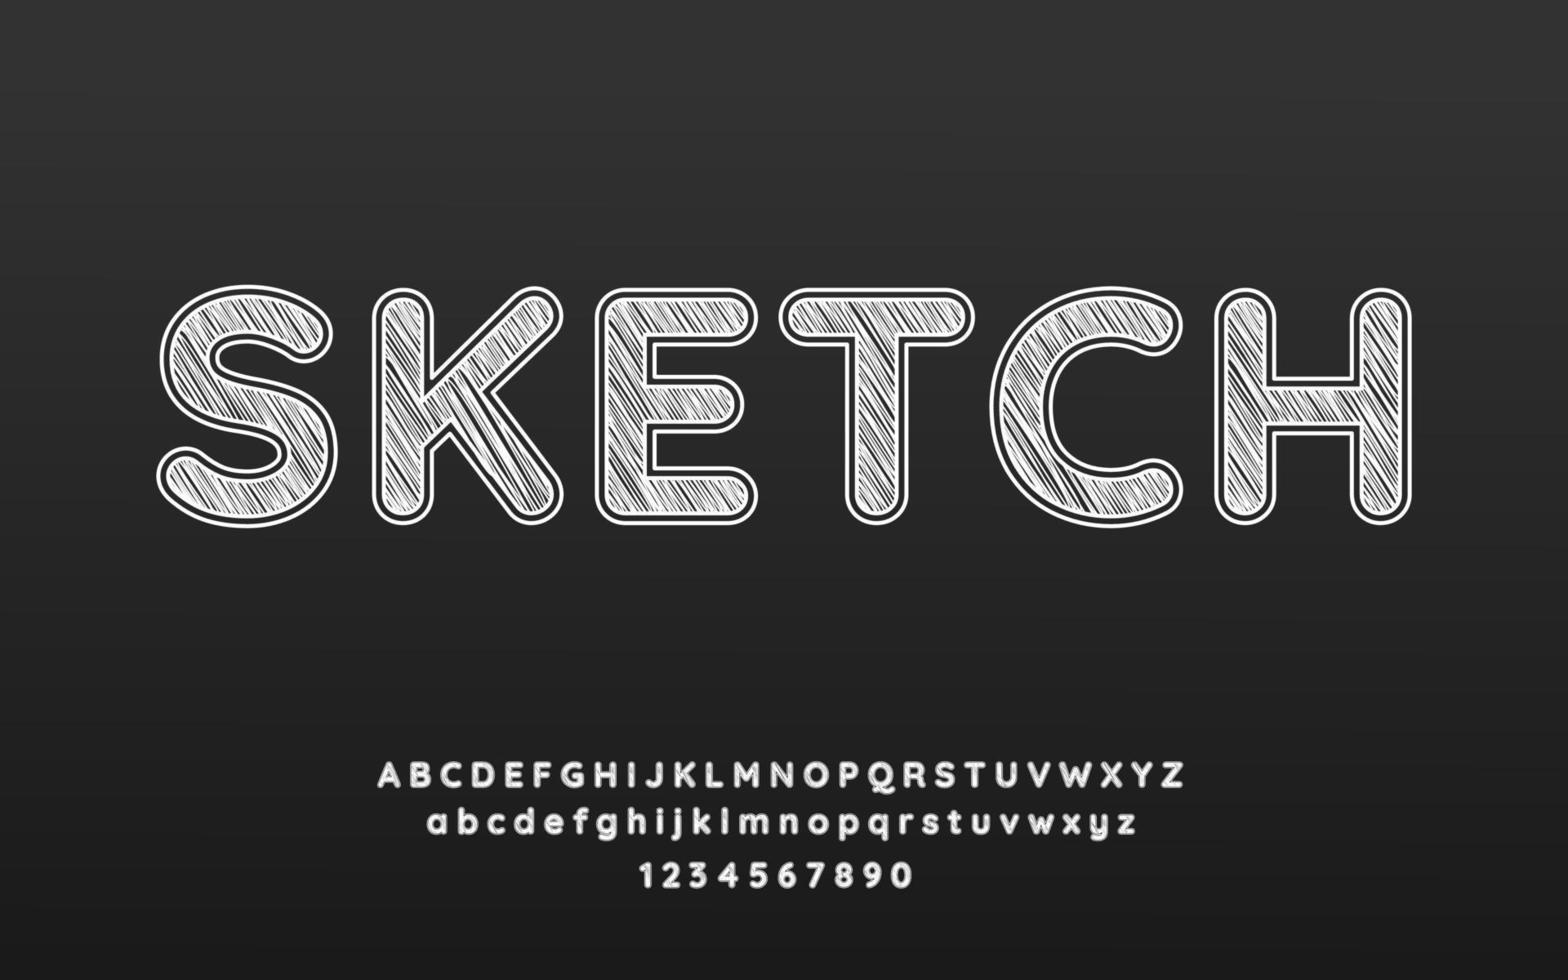 text effect with sketch texture vector